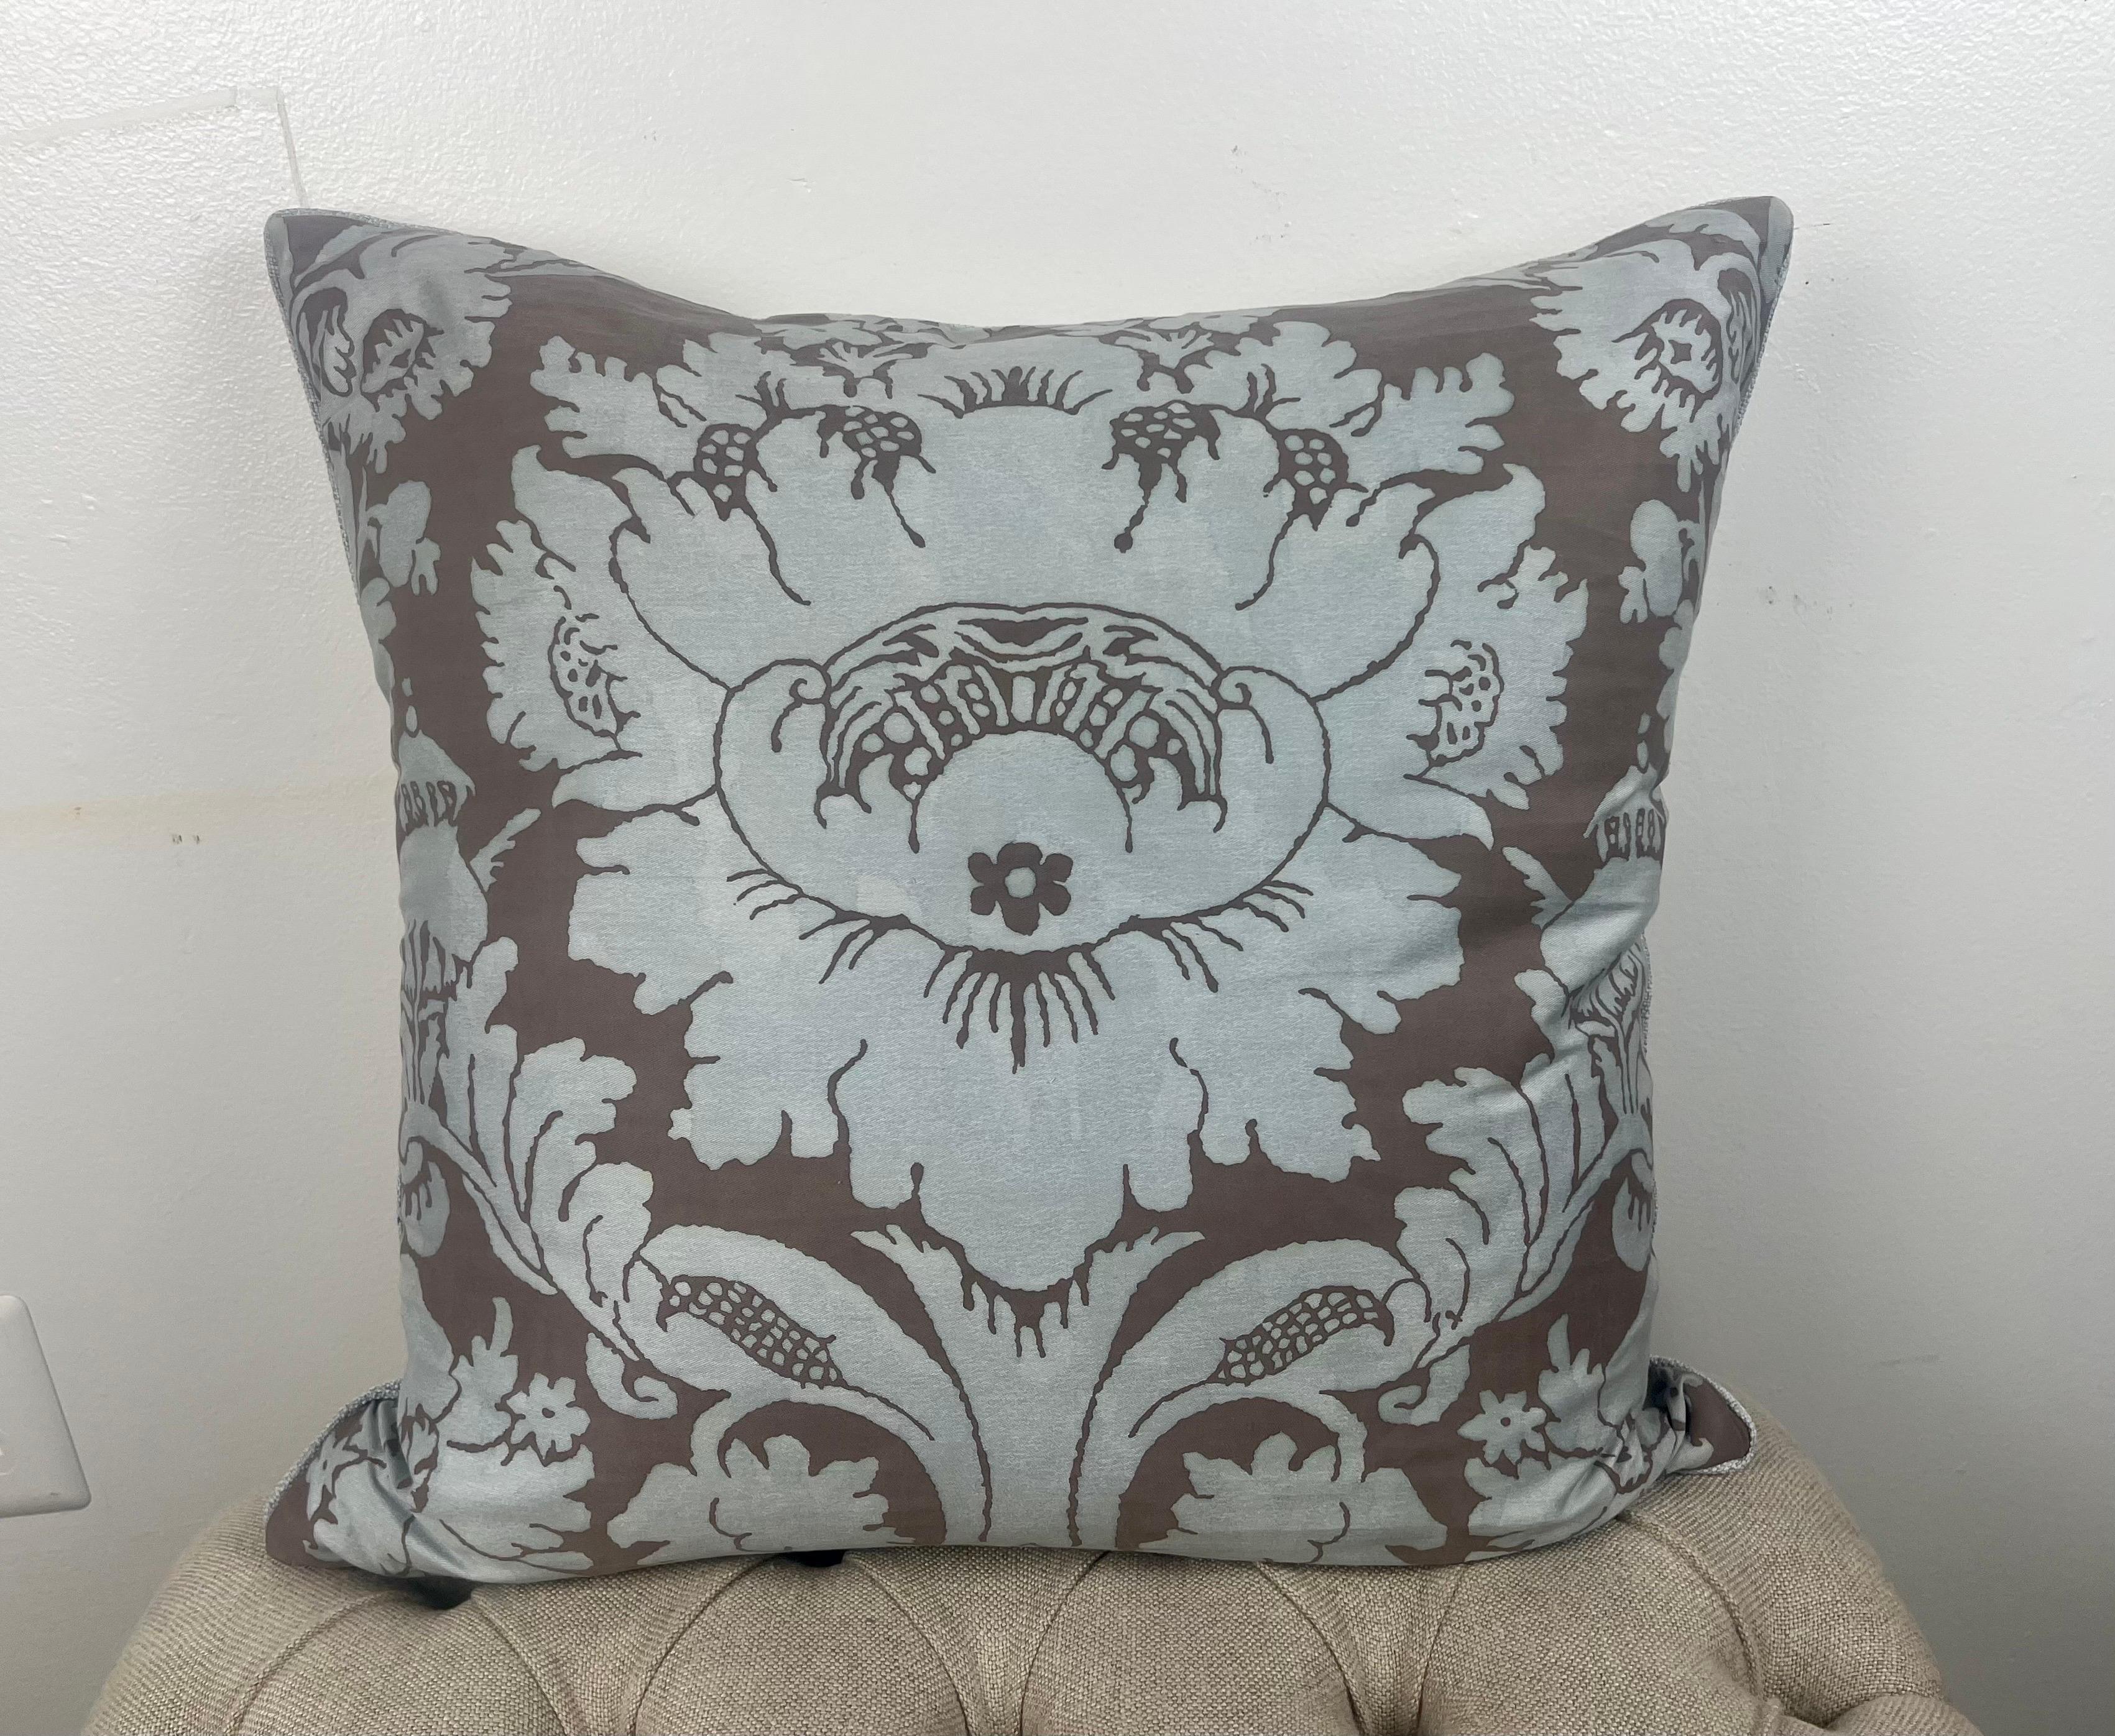 Pair of custom Vivaldi patterned Fortuny pillows with a center Damask design.  The soft blue and gray are beautiful together.  Down inserts and zipper closure.